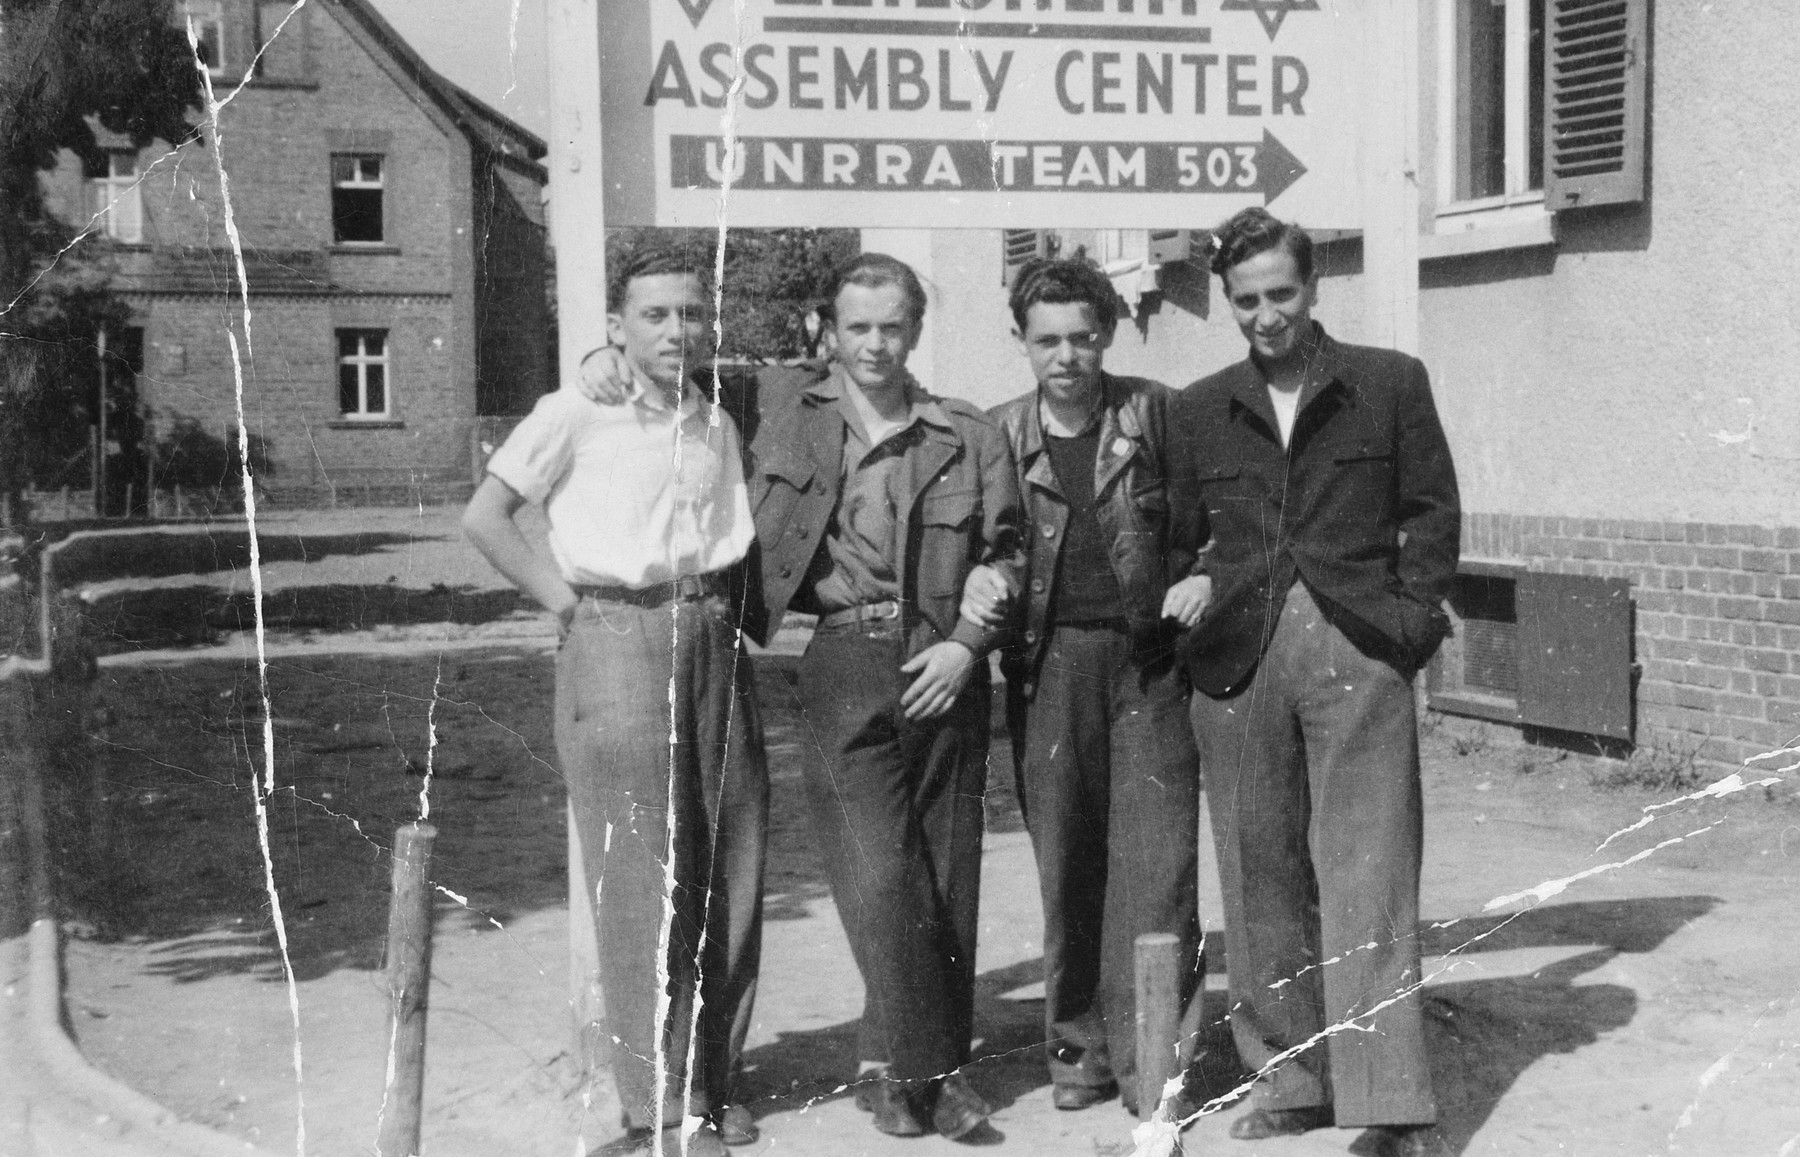 Four young Jewish men stand in front of an UNRRA Assembly Center sign in the Zeilsheim displaced person's camp.

Chuna Grynbaum is on the far right.